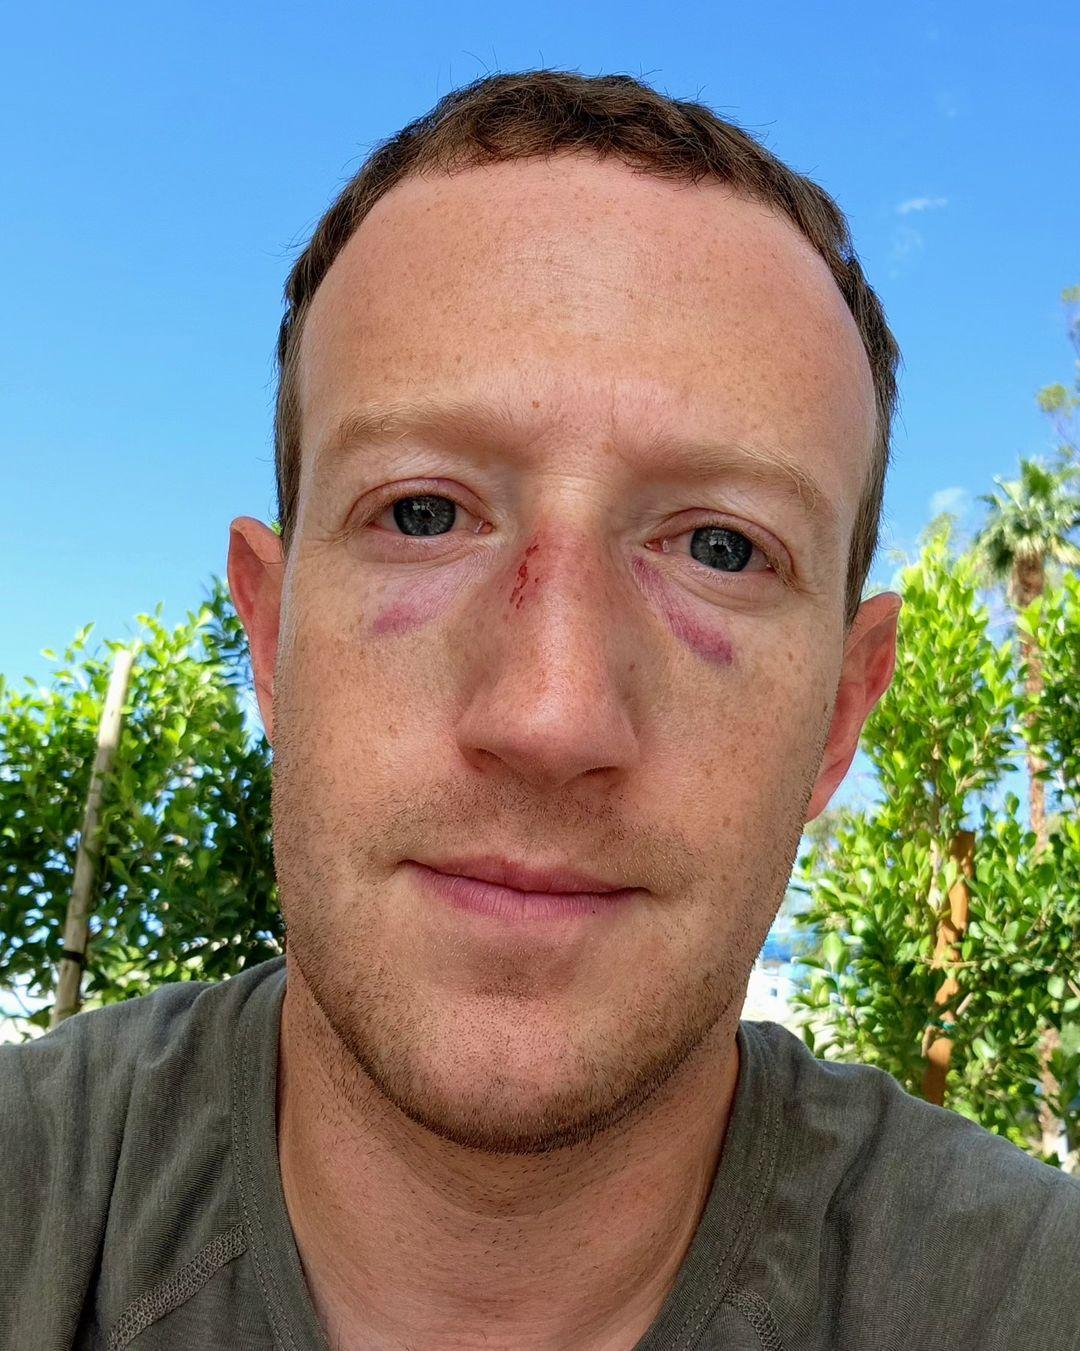 Mark Zuckerburg's Face Gets BUSTED During Sparring Match